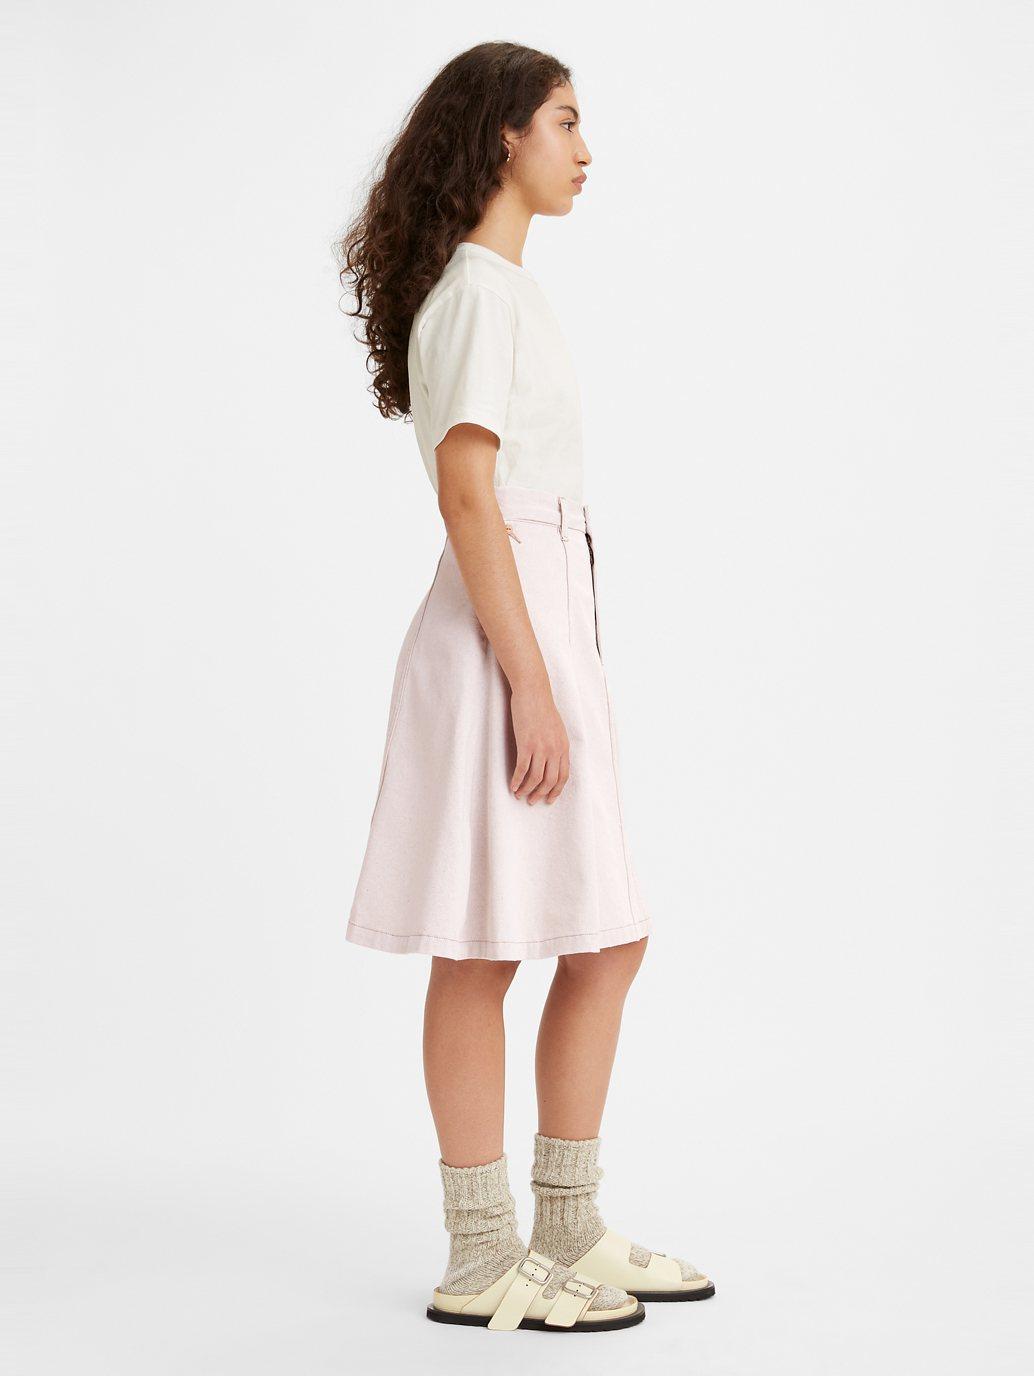 Buy Levi's® Made & Crafted® Women's Petal Skirt | Levi's® HK